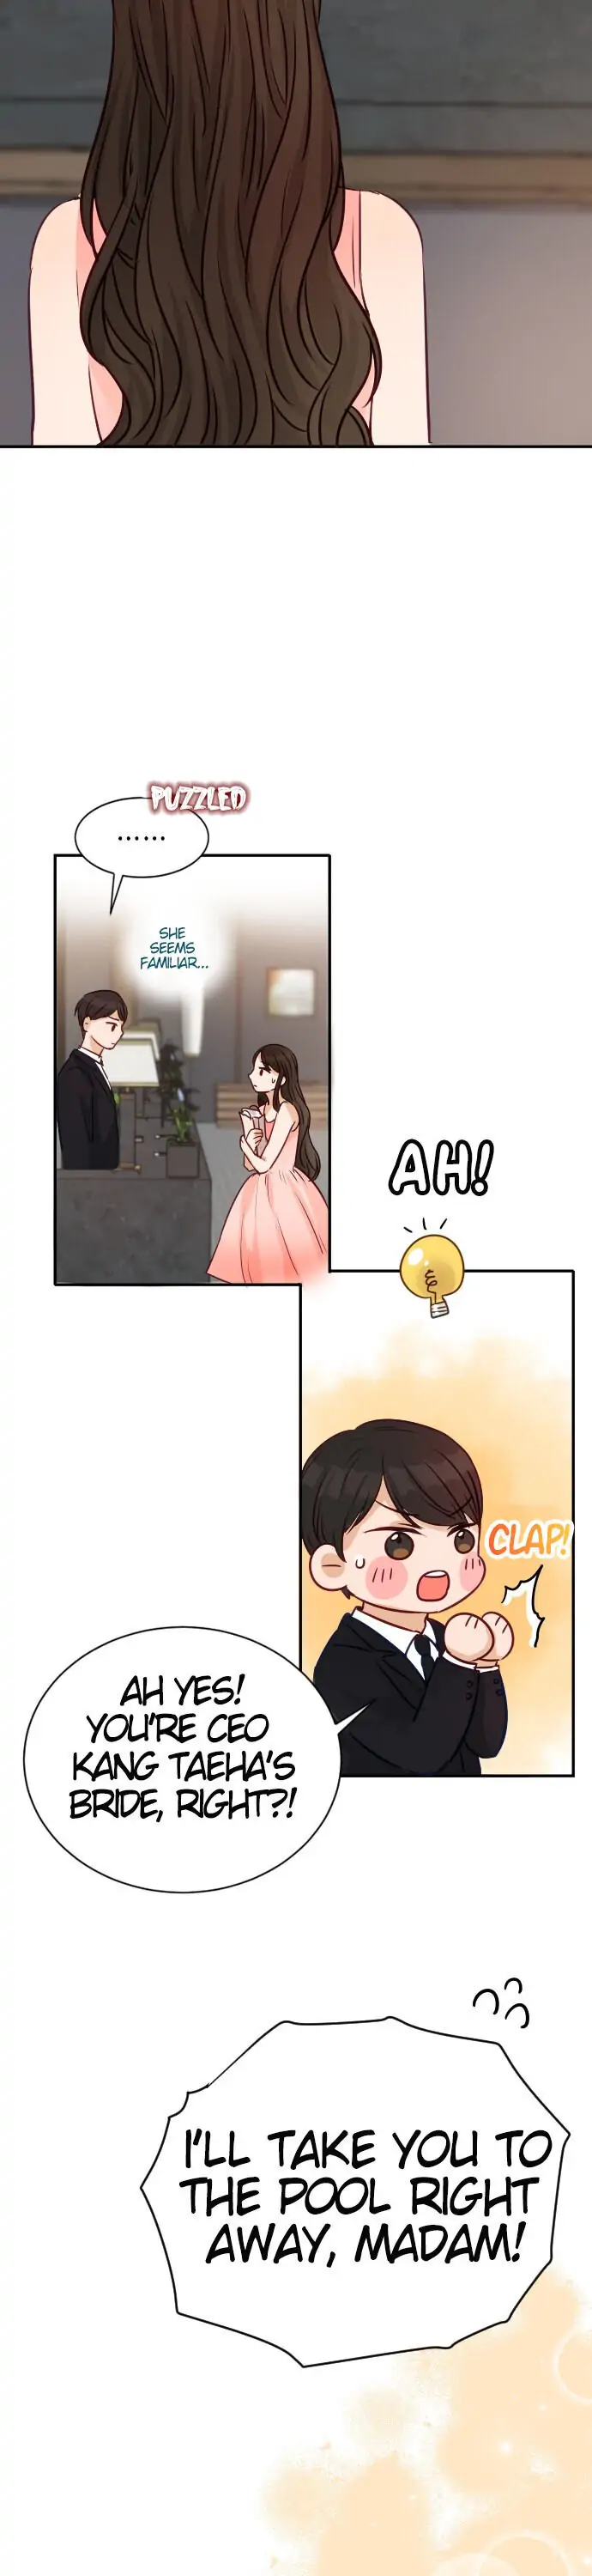 The Story of Park’s Marriage Contract chapter 6